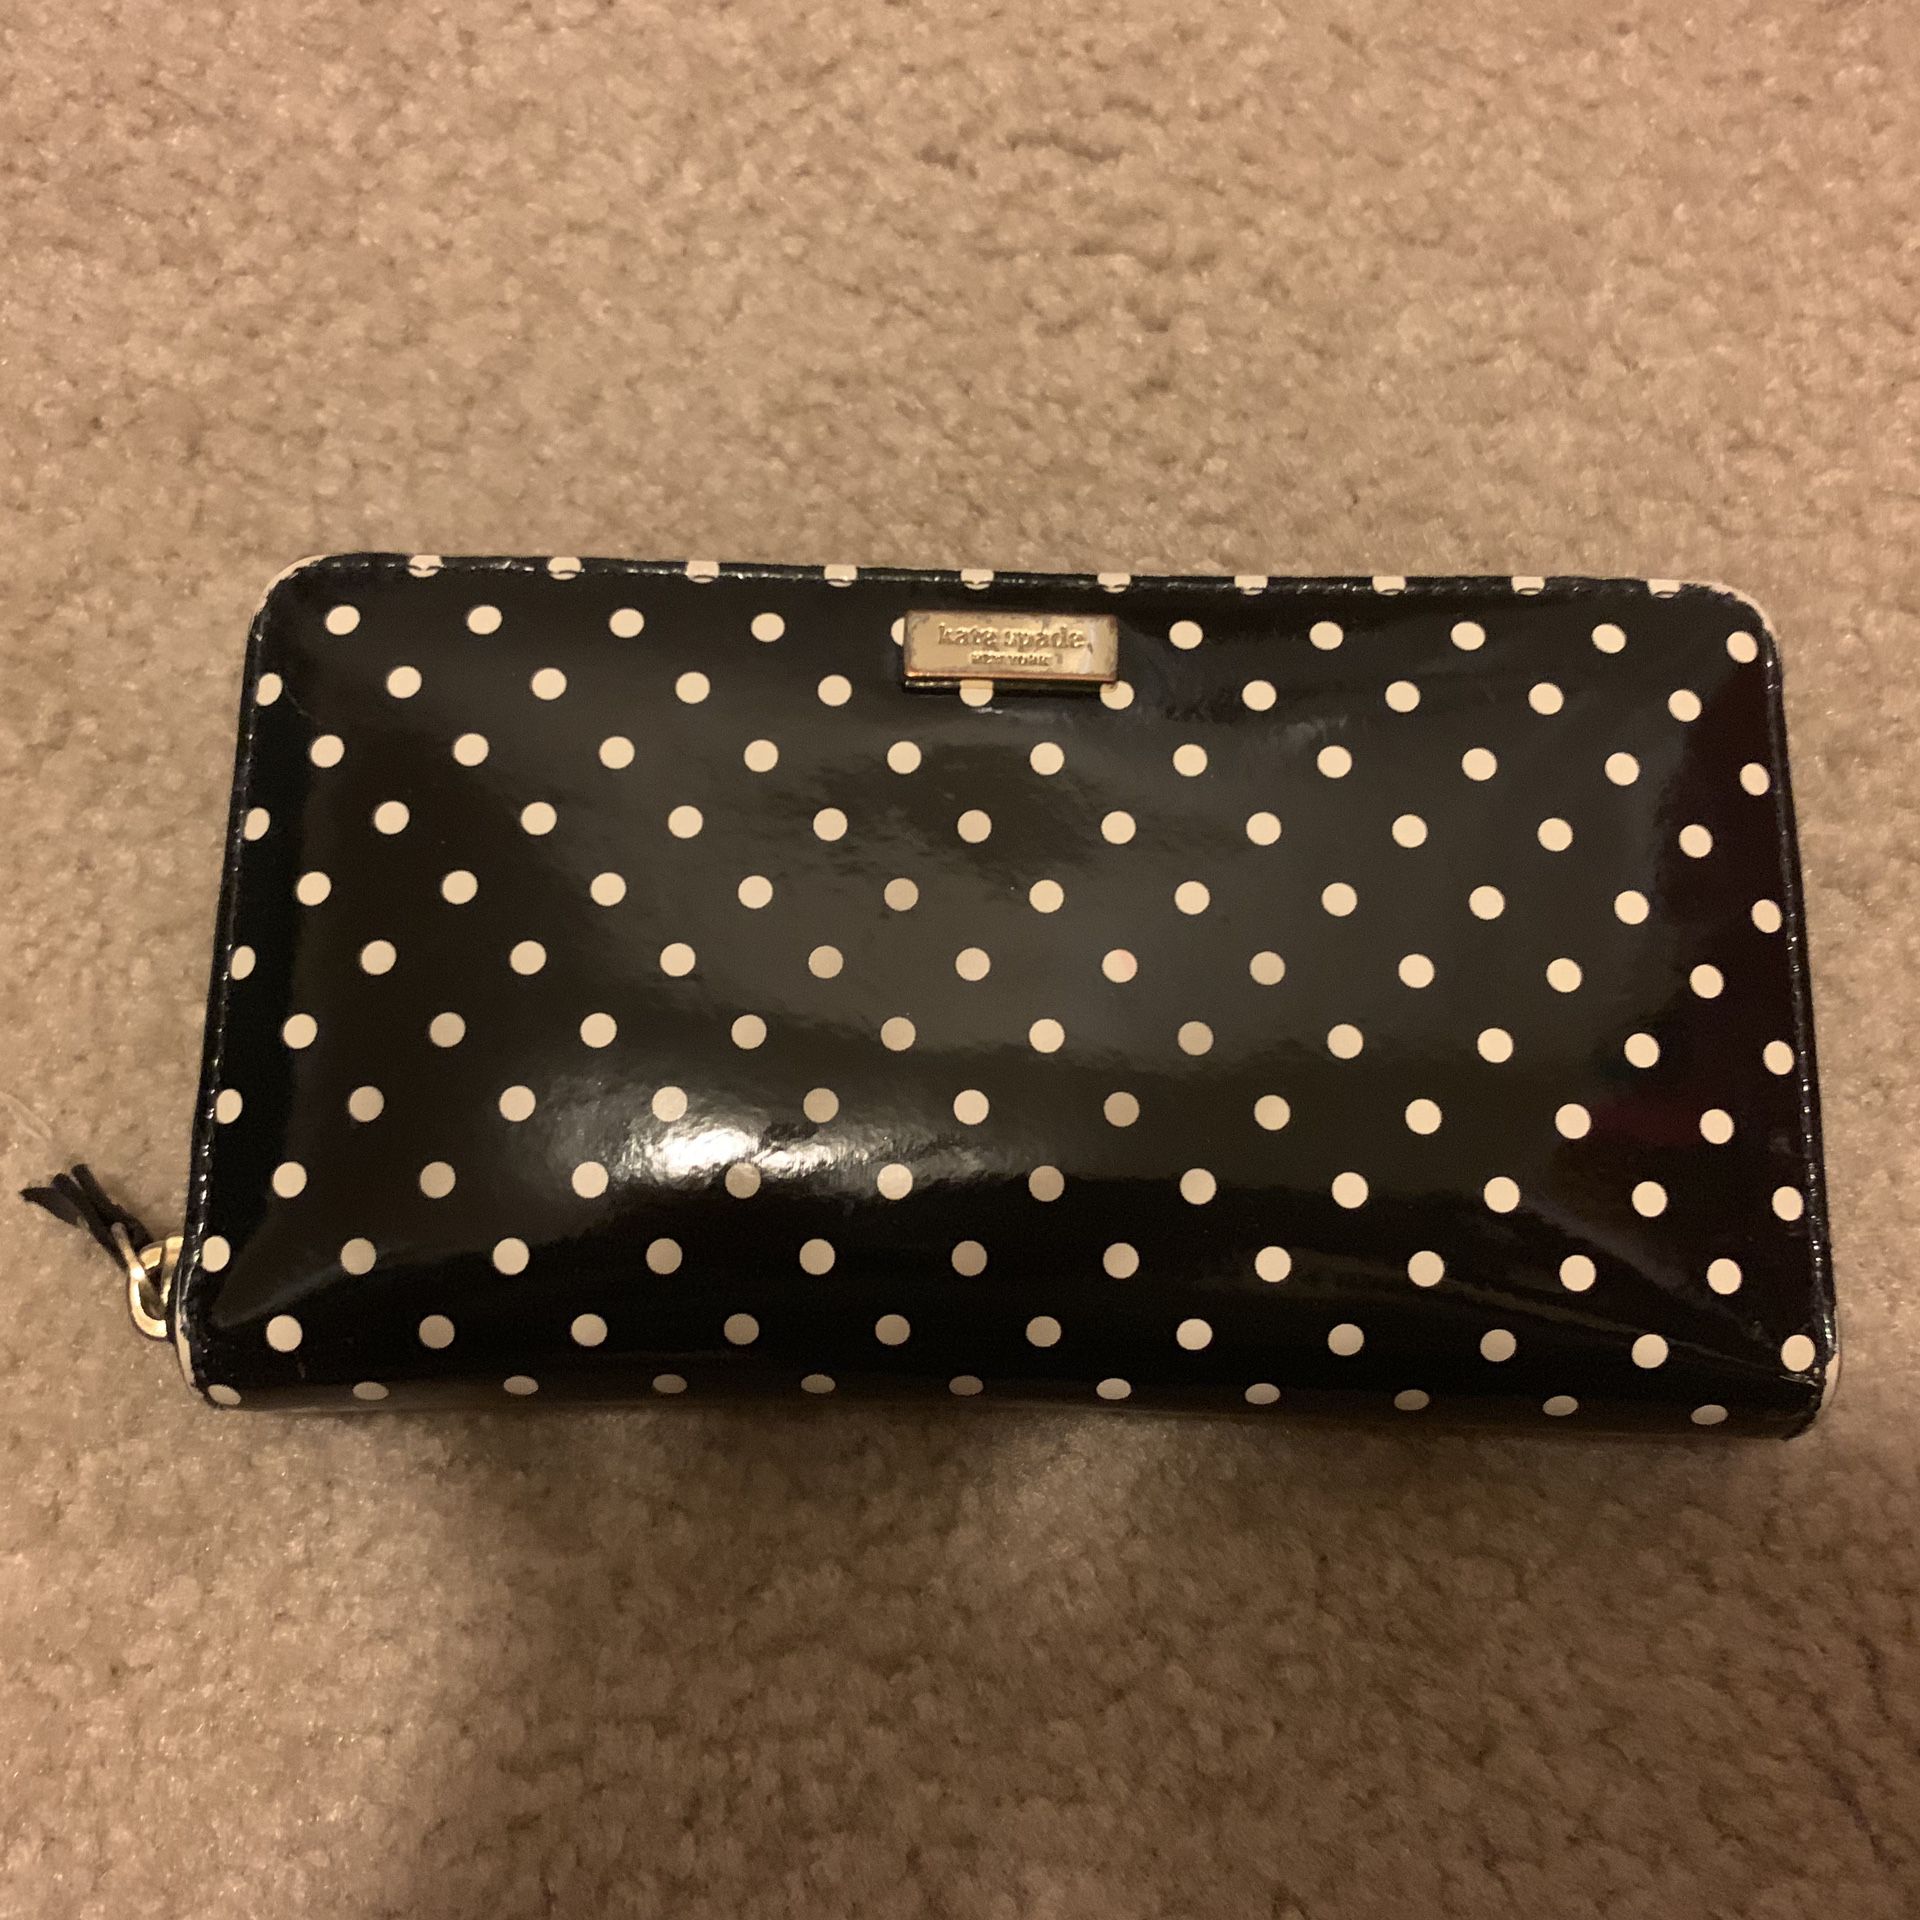 Kate and spade